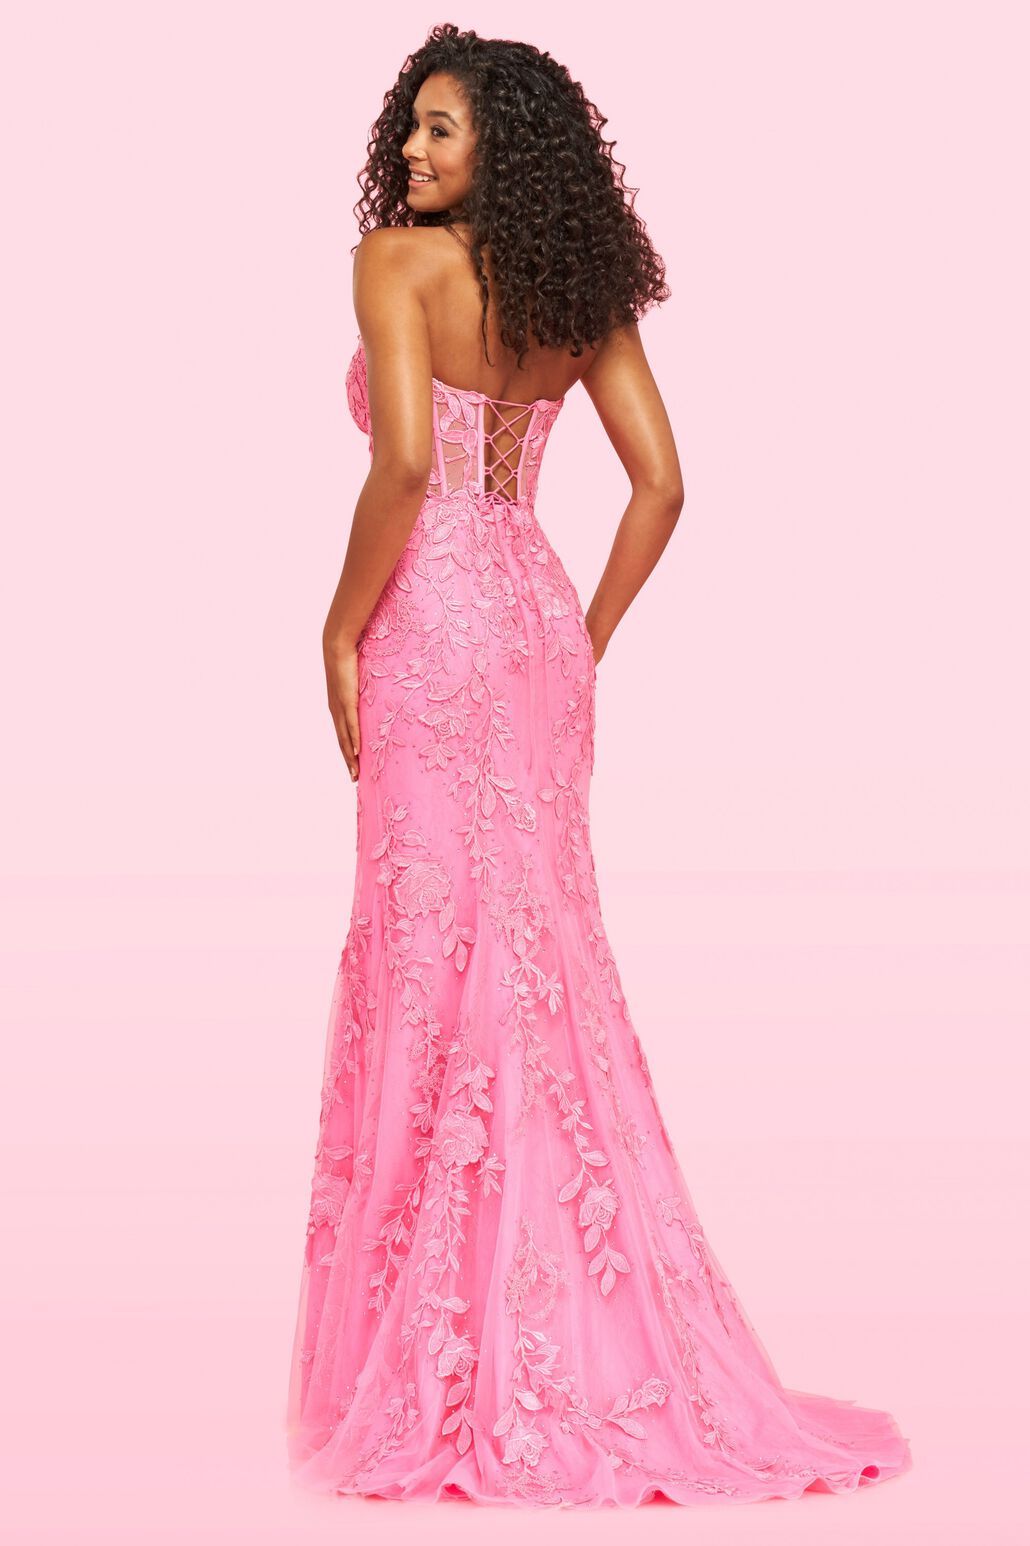 Sherri Hill leaf lace embroidered gown style 54227 - Fitted gown with corset top, lace-up back, and sweetheart neckline. Perfect for prom and special occasions.